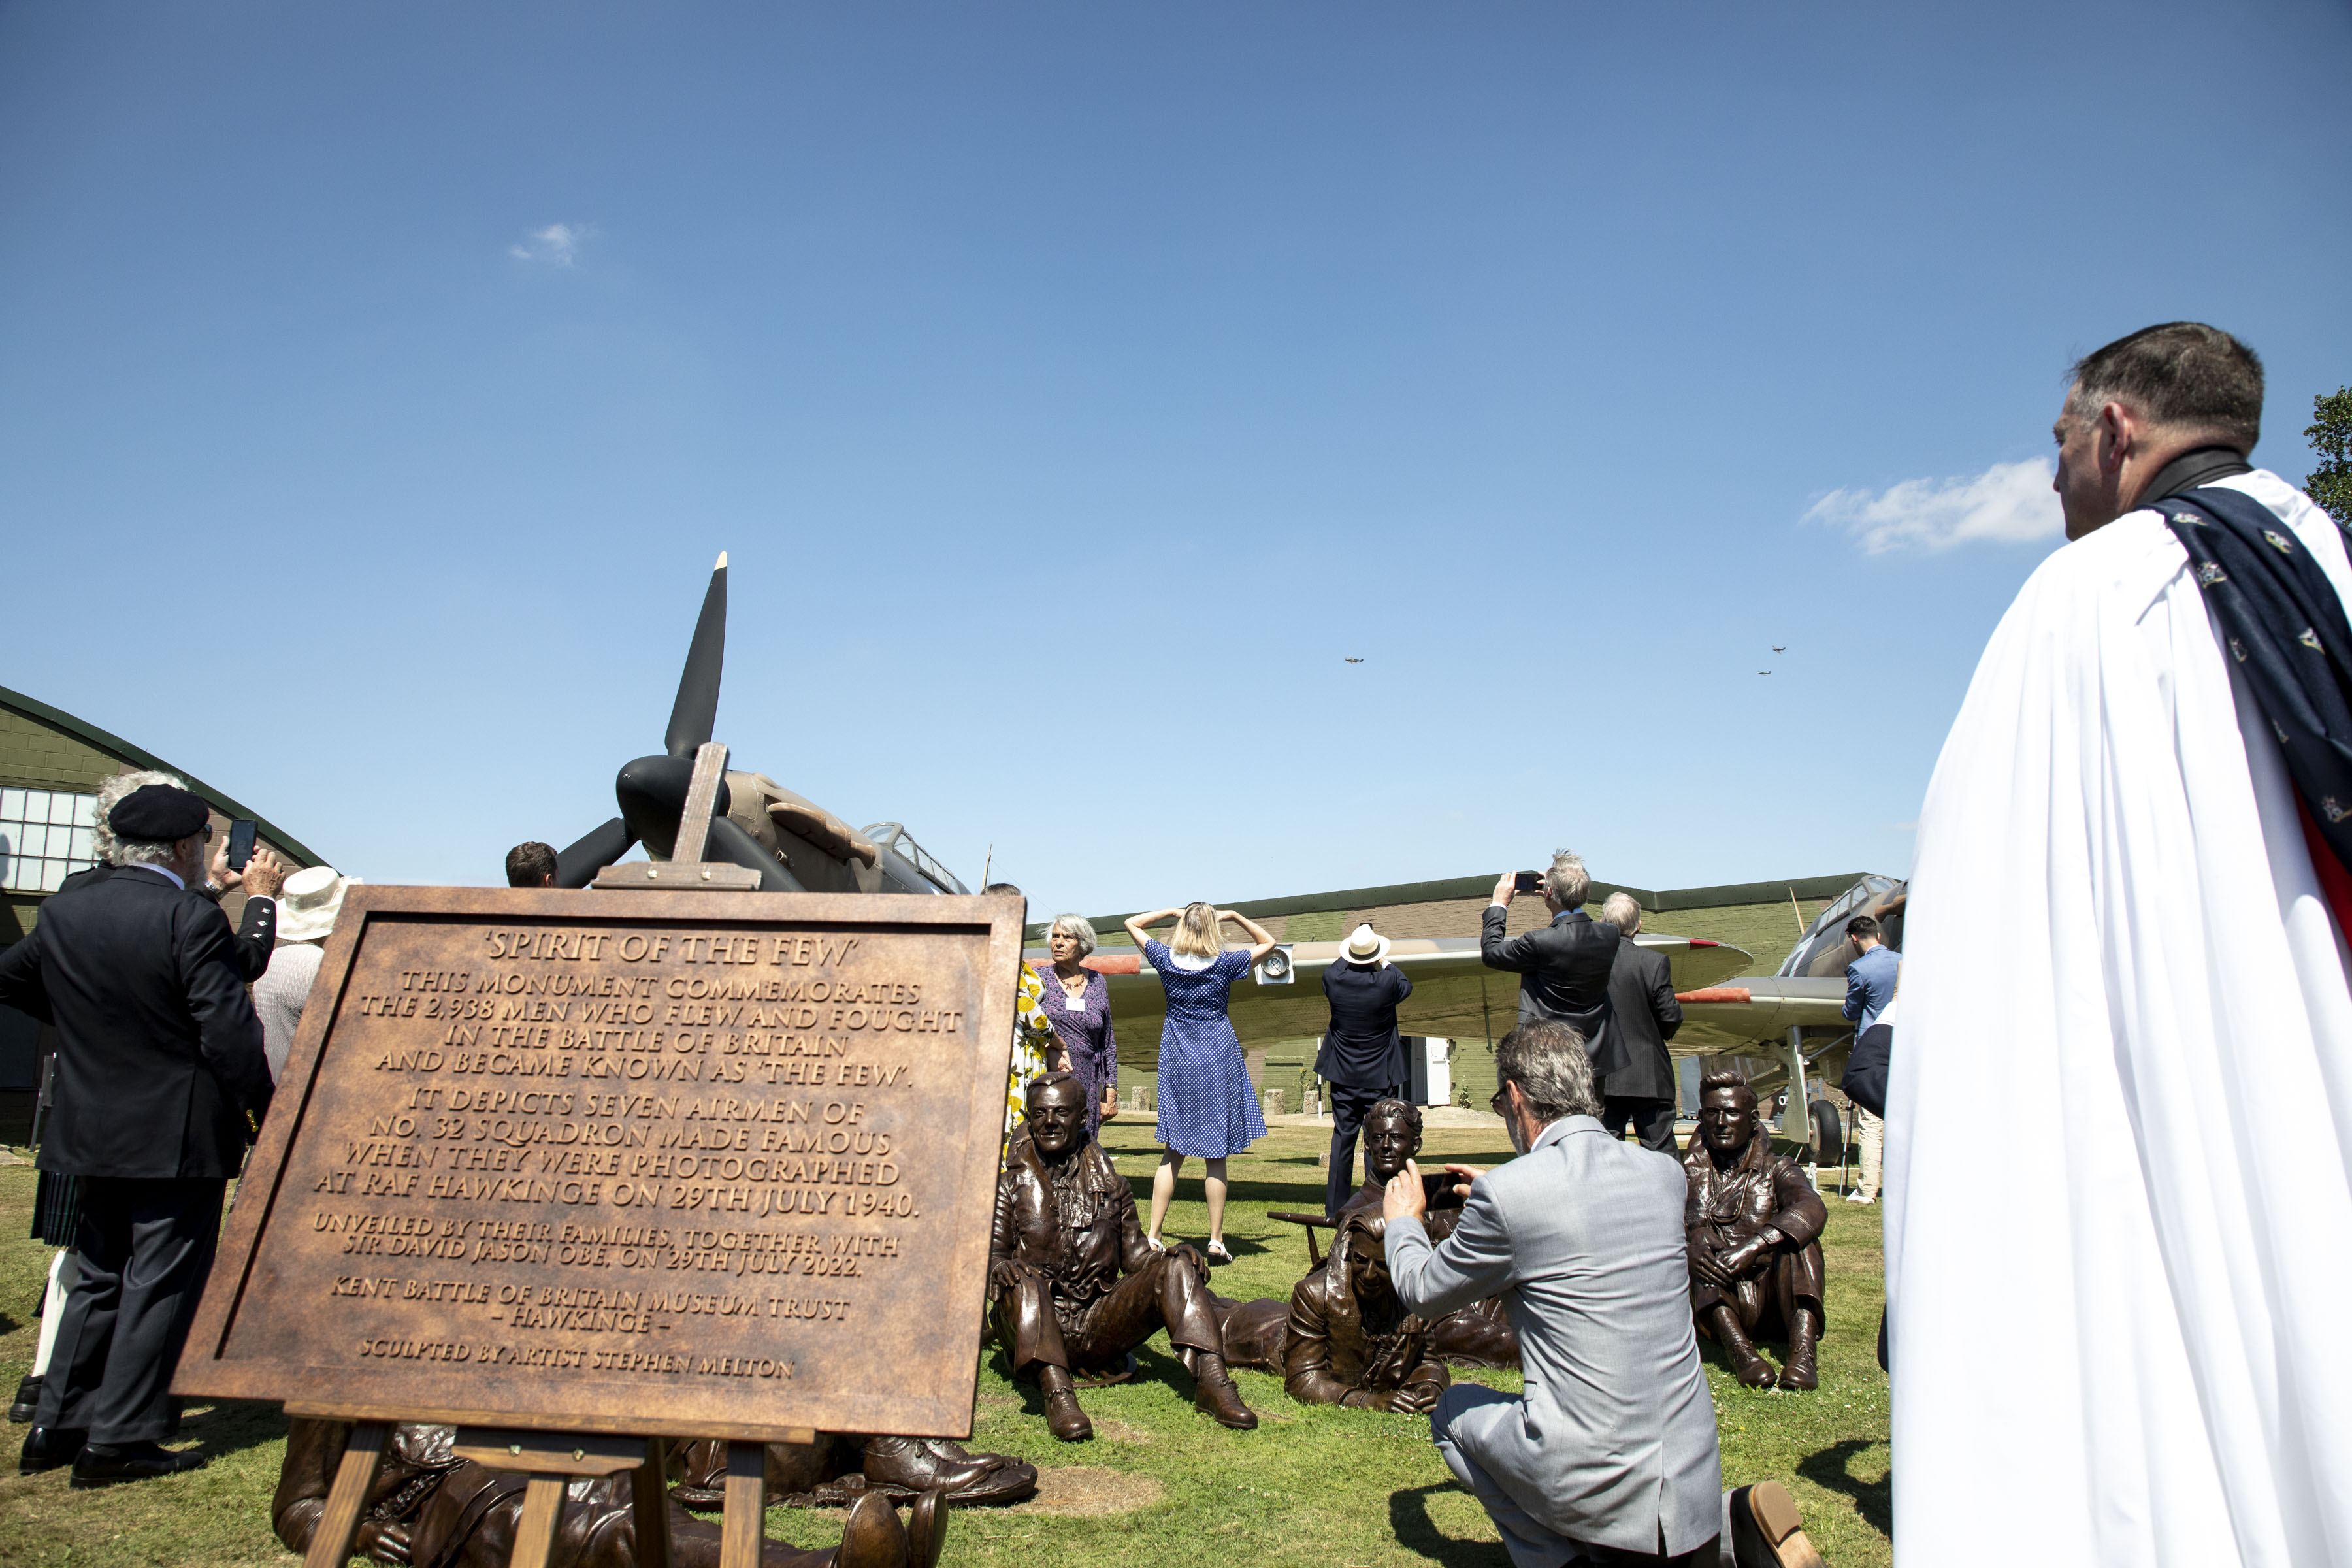 Image shows members of the public, bronze statues, RAF Padre and commemorative plaque.